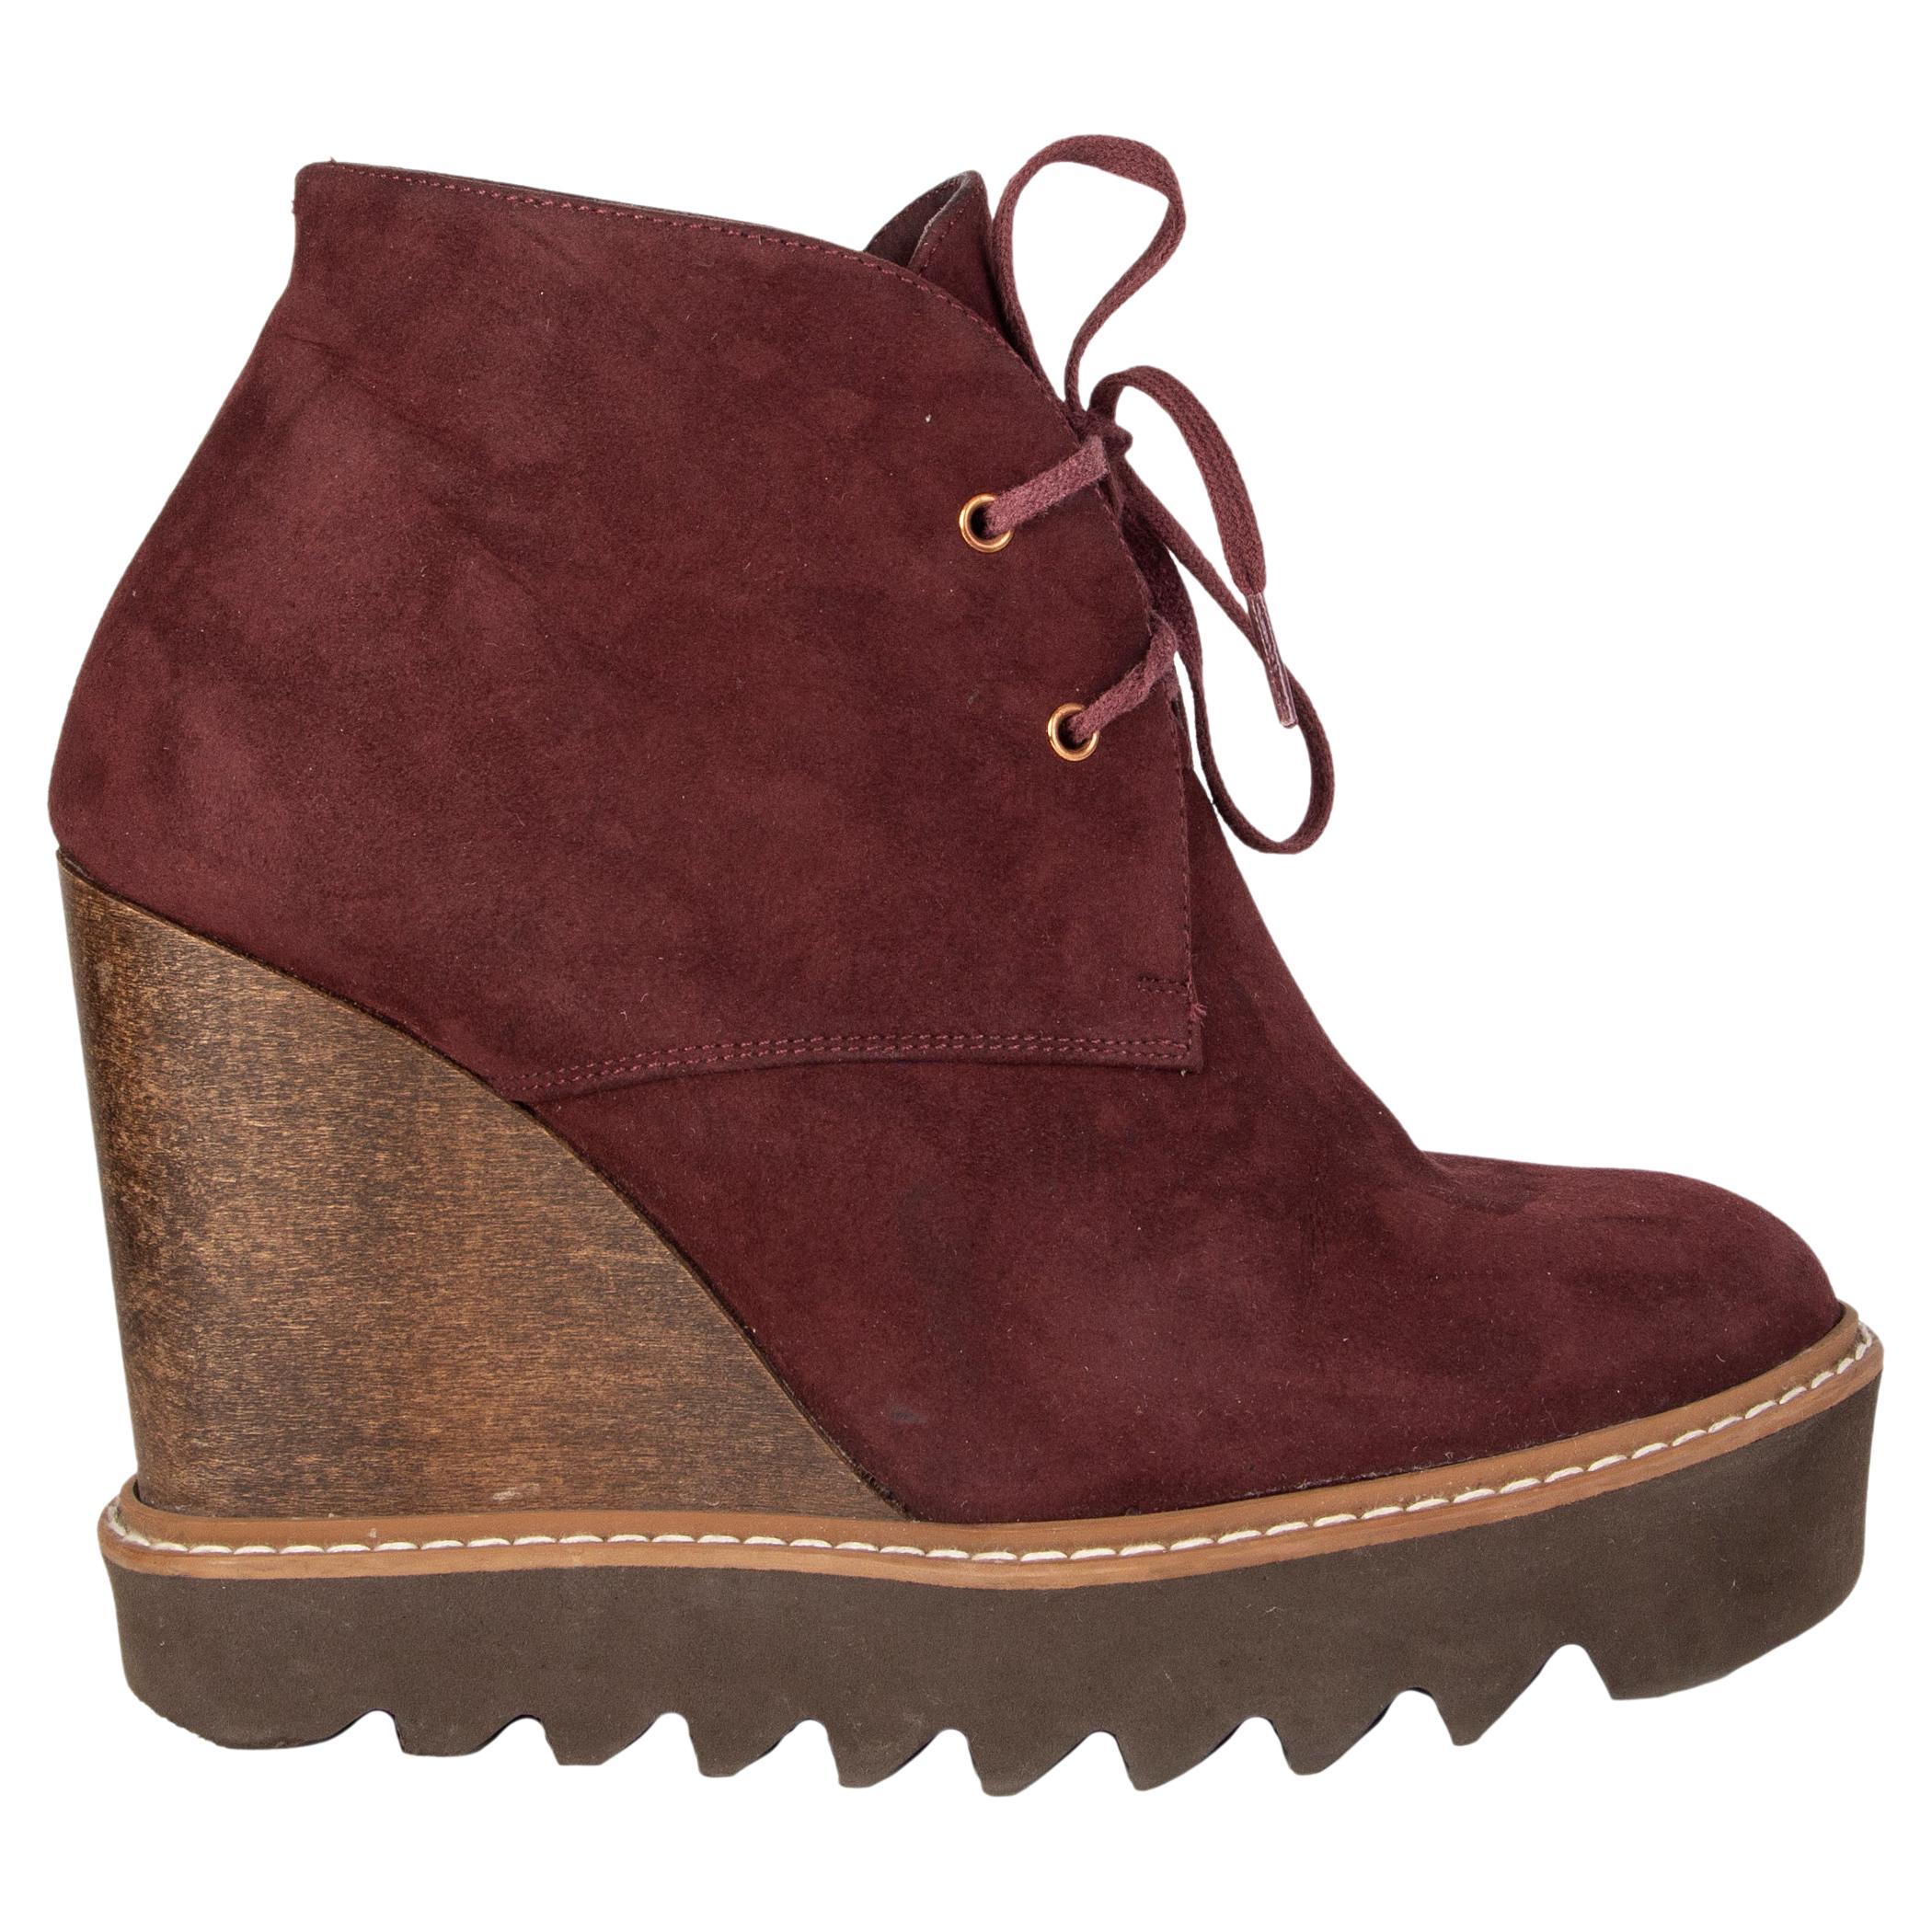 STELLA MCCARTNEY burgundy FAUX SUEDE LEANA Platform Wedge Ankle Boots Shoes 38